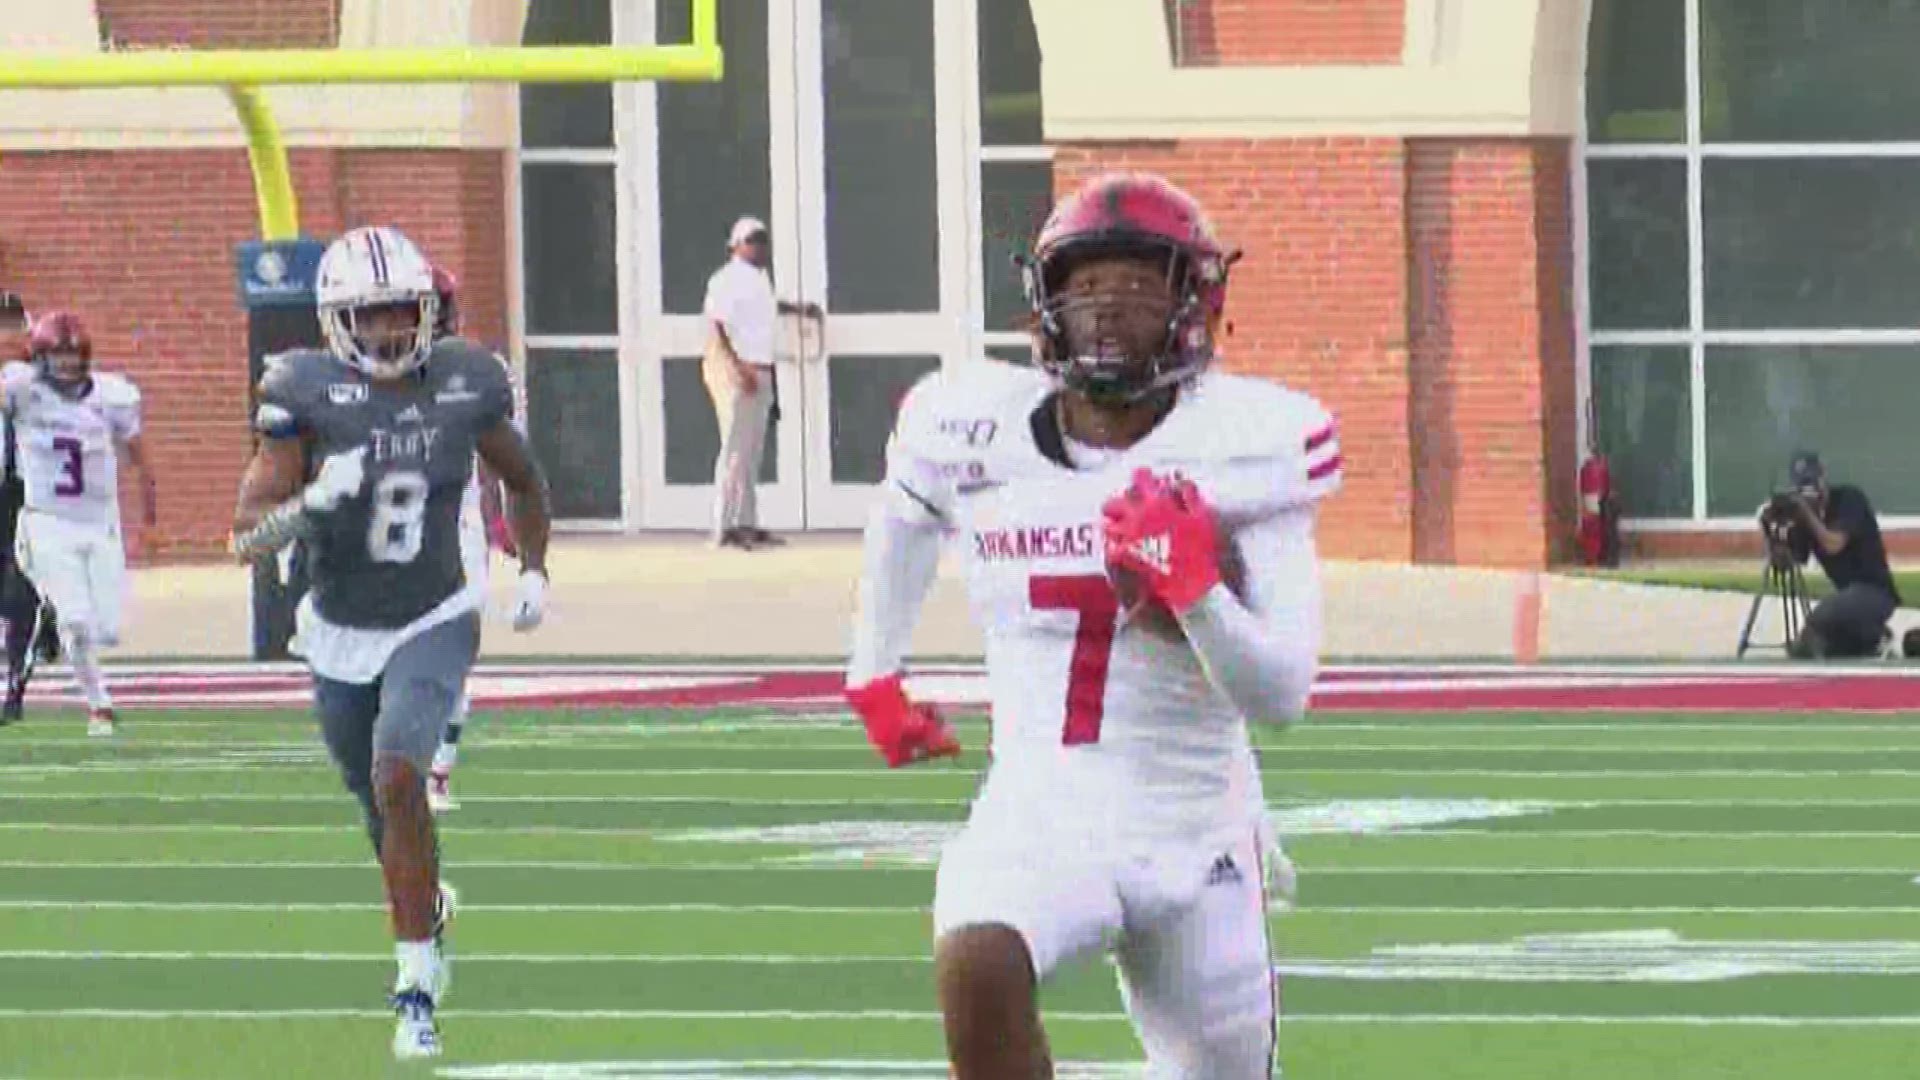 Bayless became the fourth player in Arkansas State history to record over 200 receiving yards in a game.